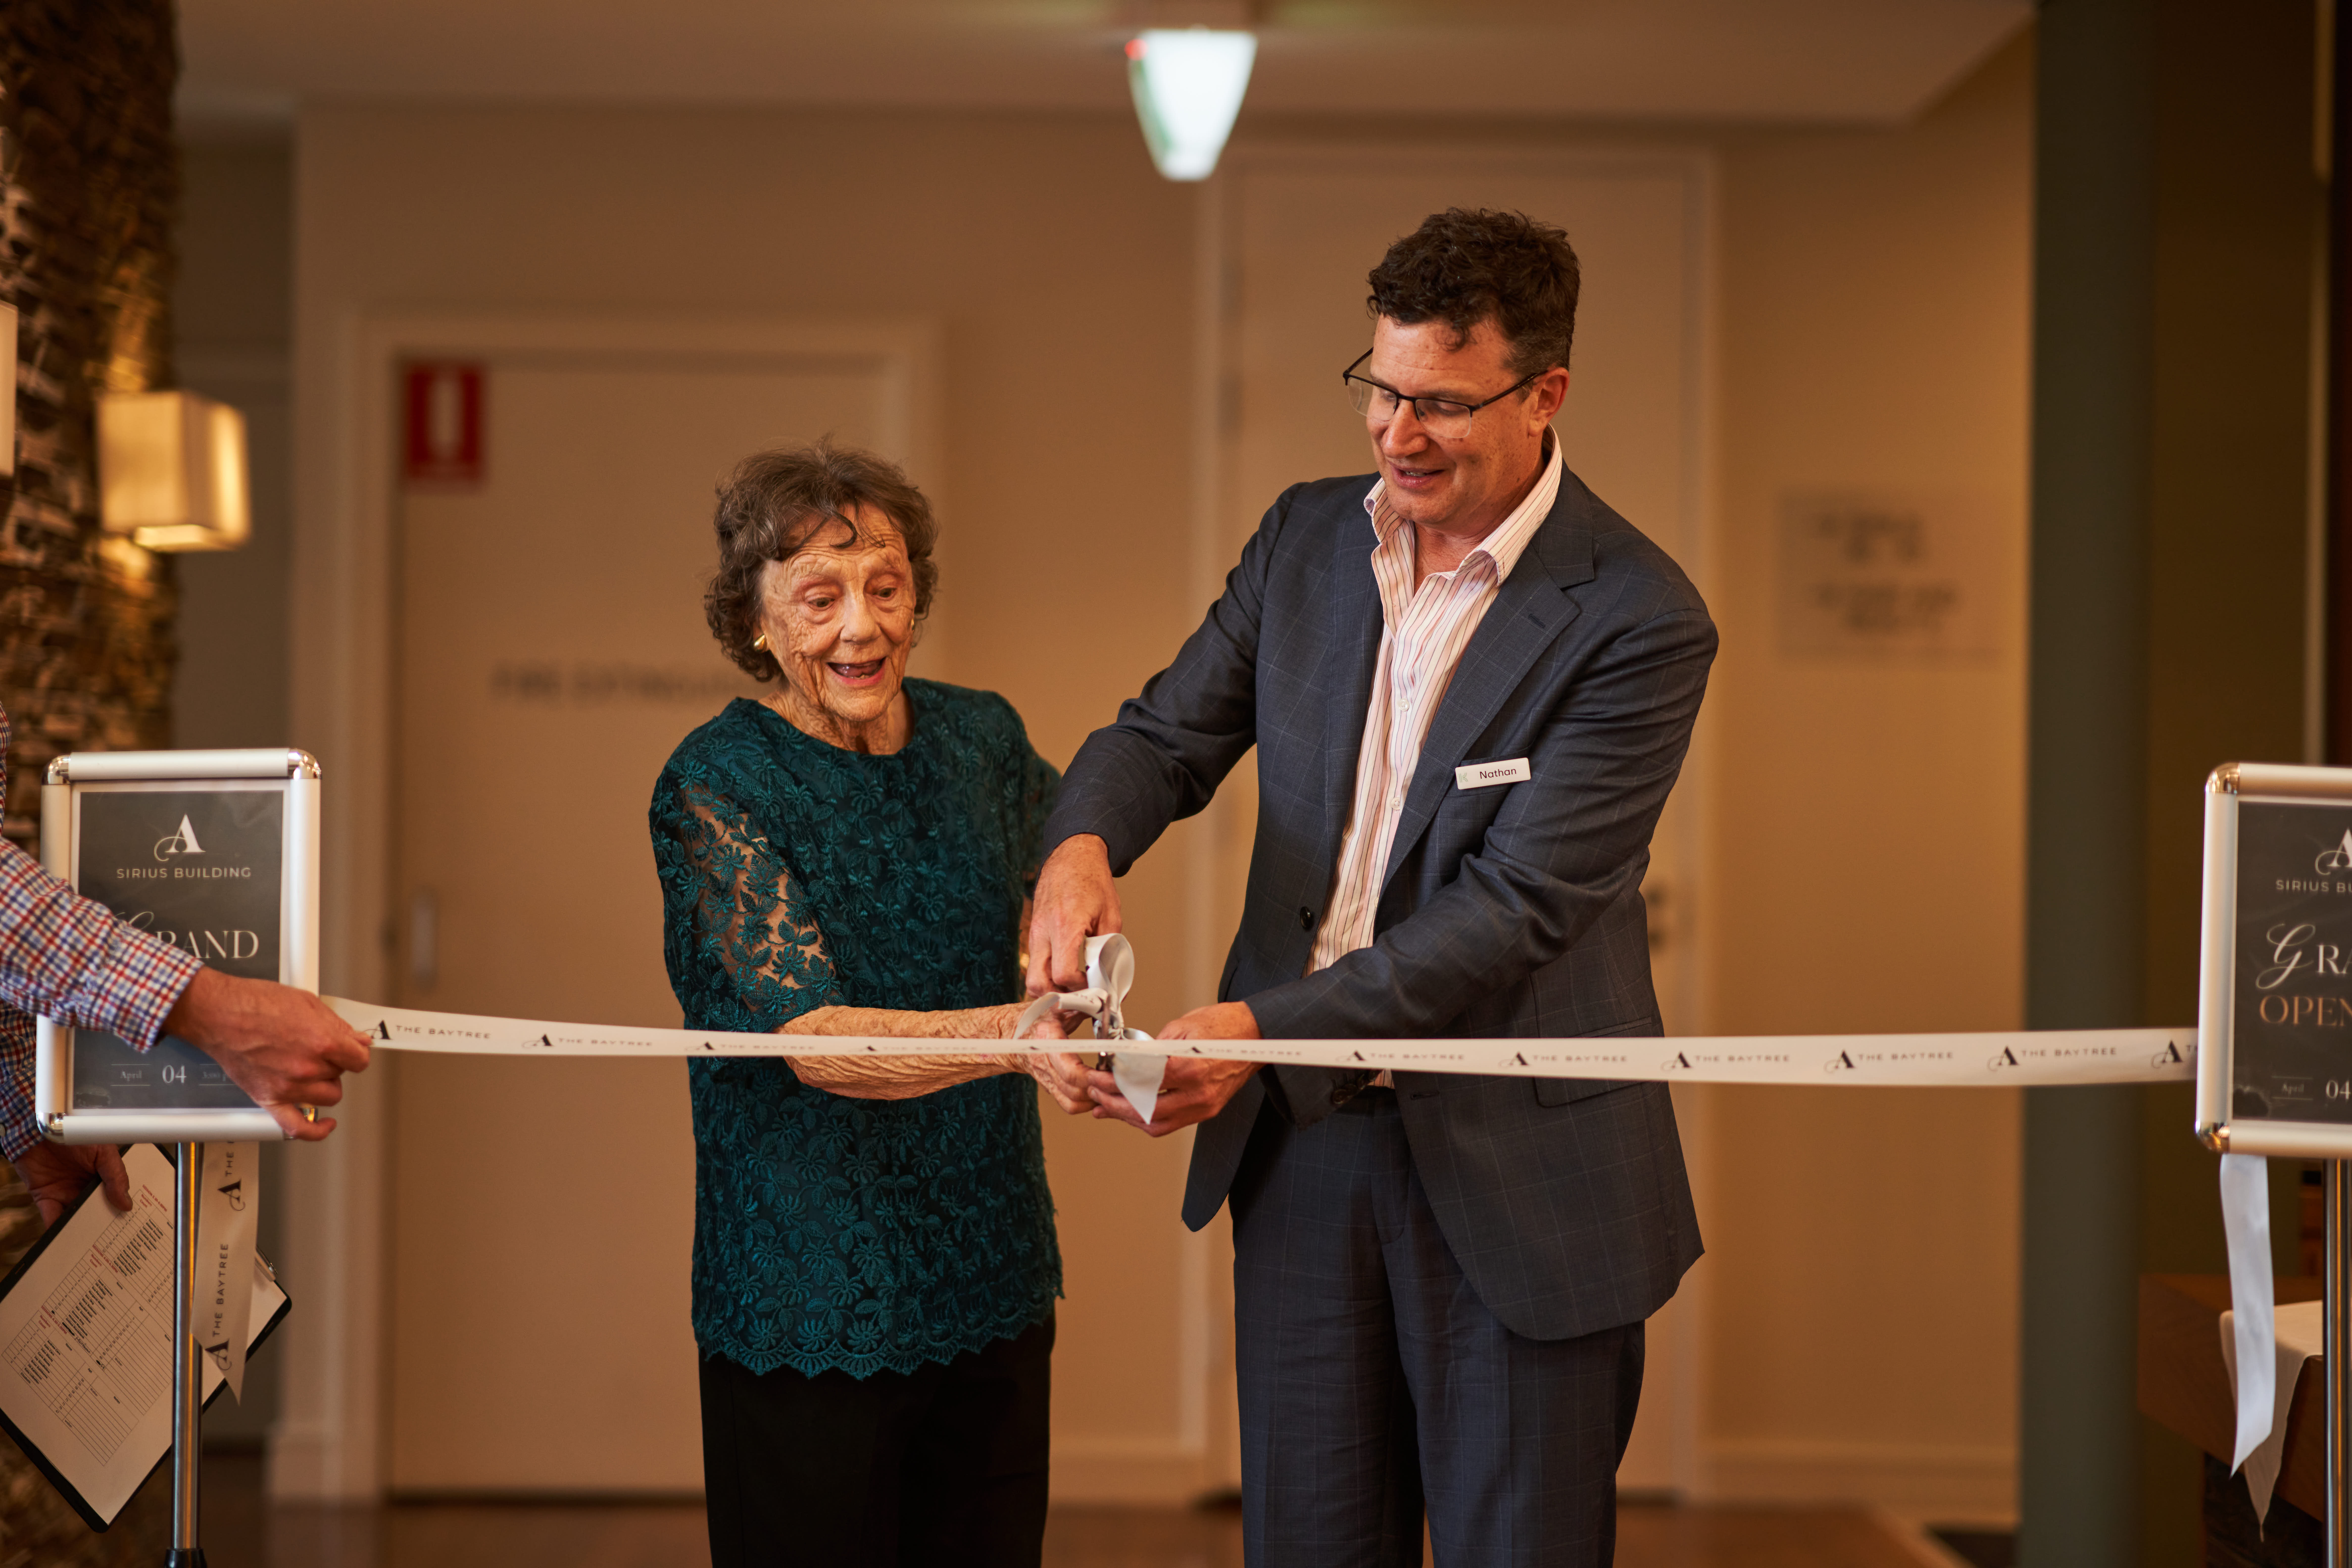 Keyton CEO Nathan Cockerill and resident Jean cutting the ribbon at the Grand Opening of the Sirius Building at The Baytree by Ardency